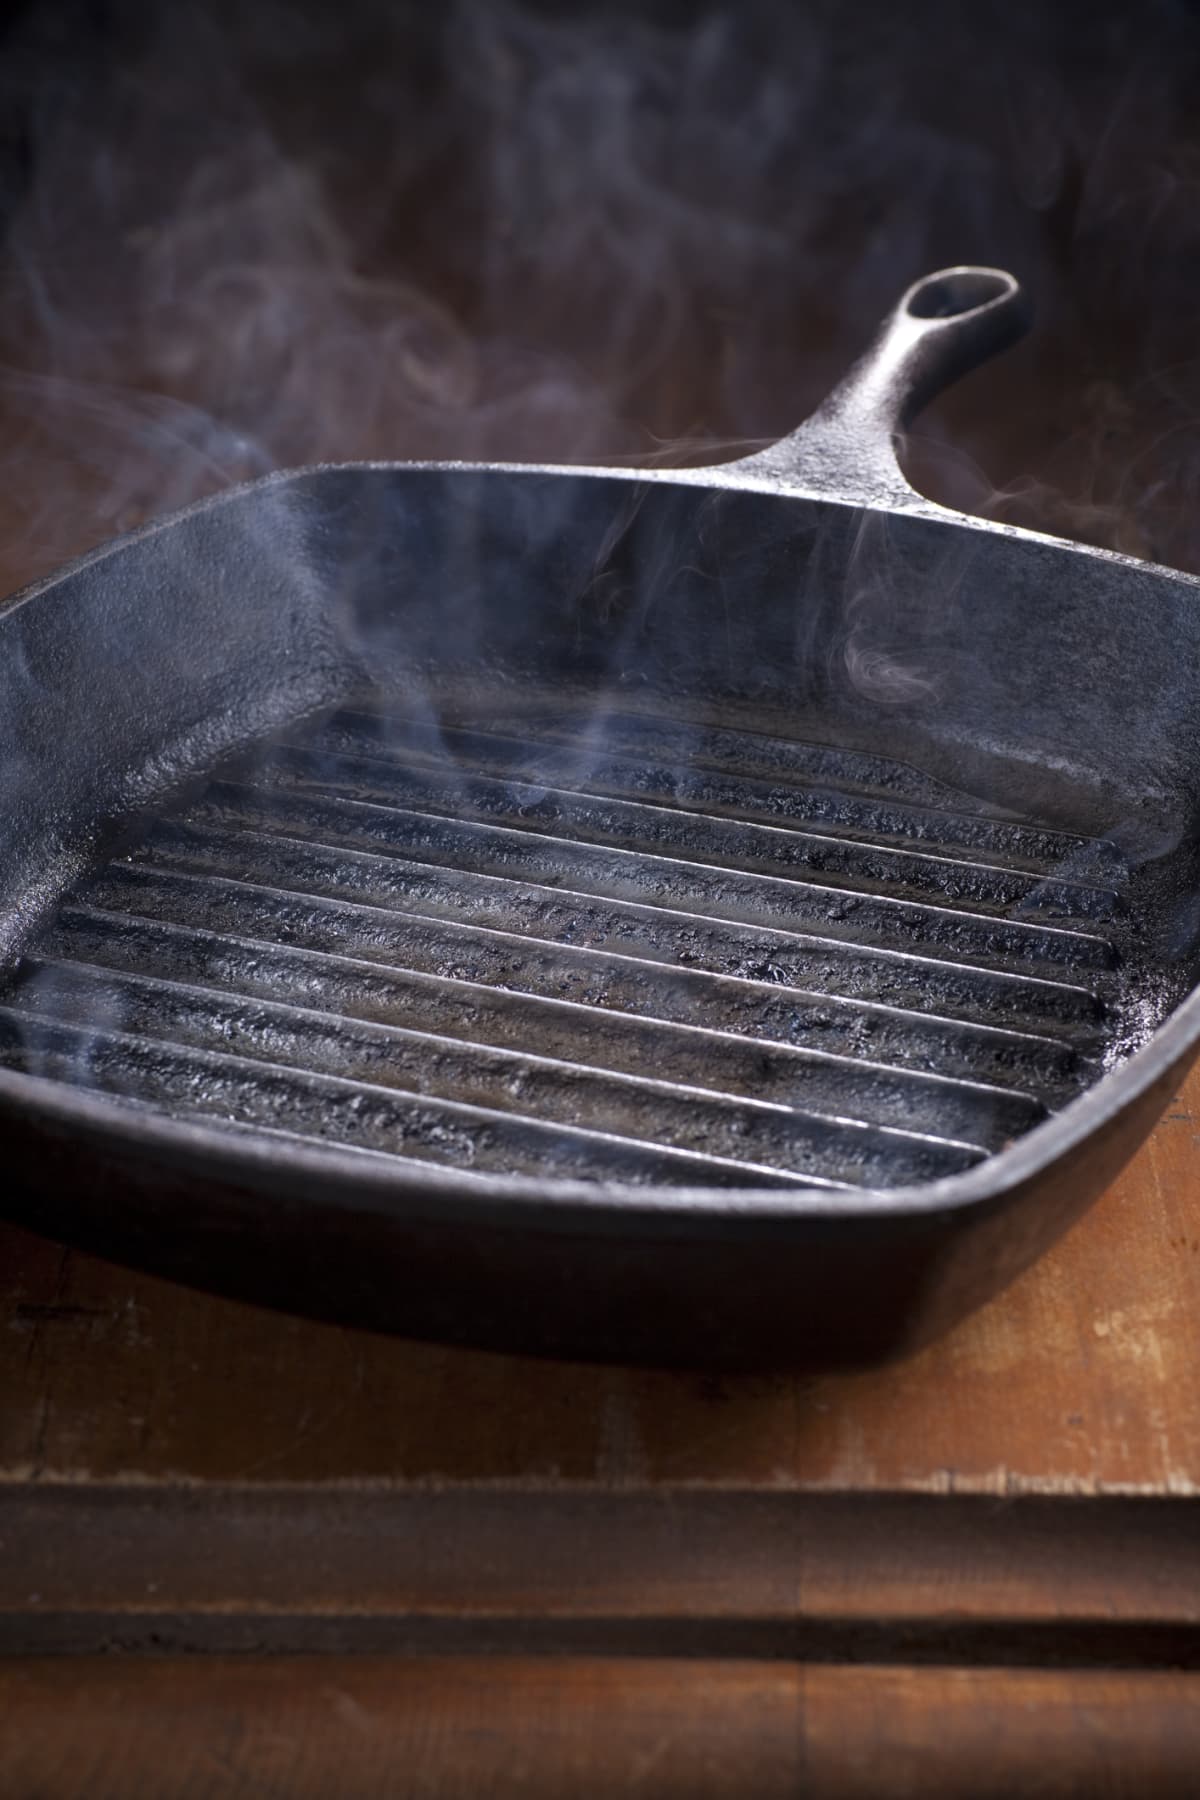 Smoking cast iron griddle pan on a dark wooden table